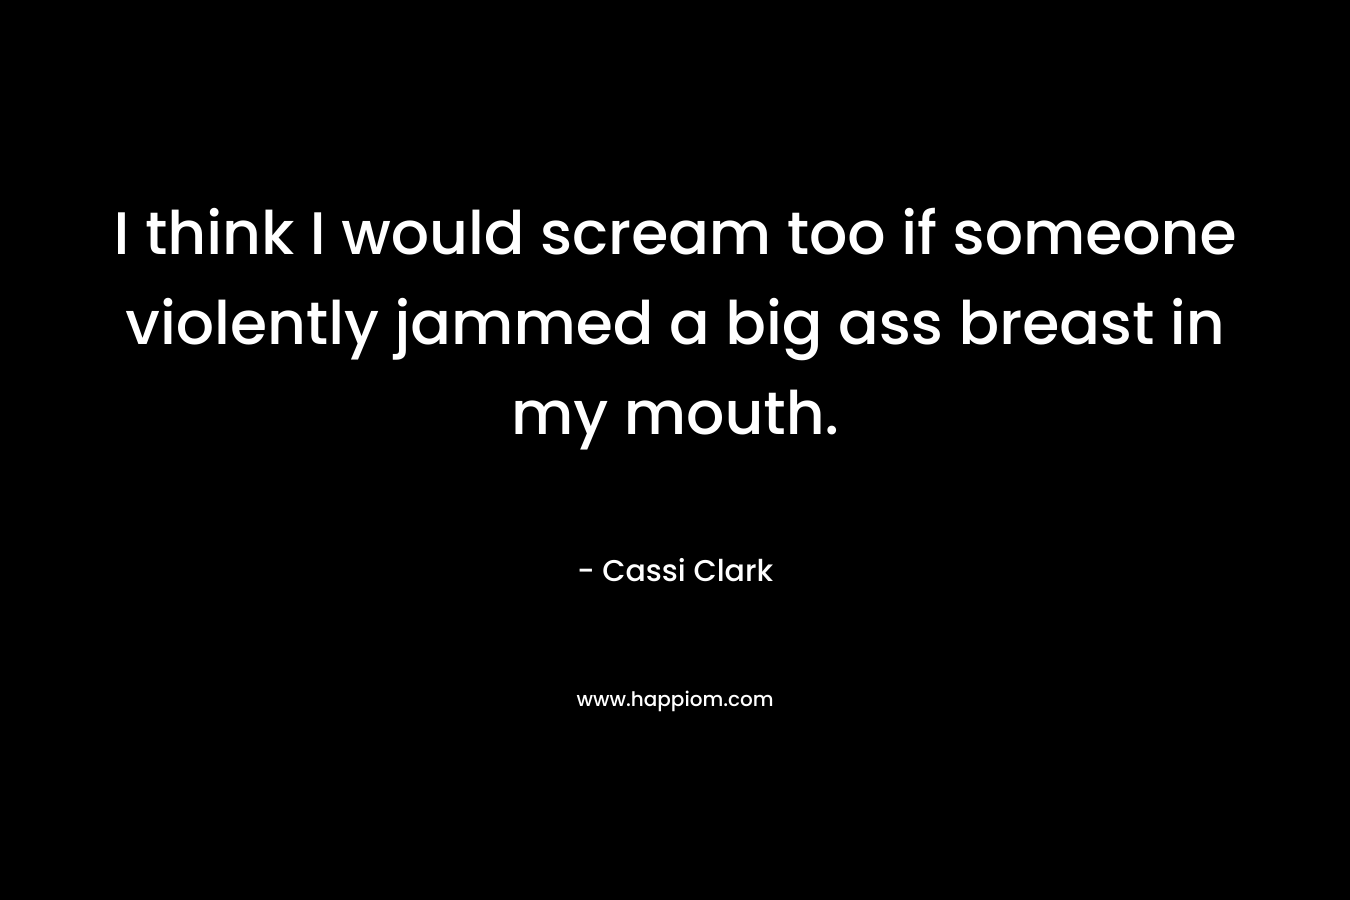 I think I would scream too if someone violently jammed a big ass breast in my mouth. – Cassi Clark